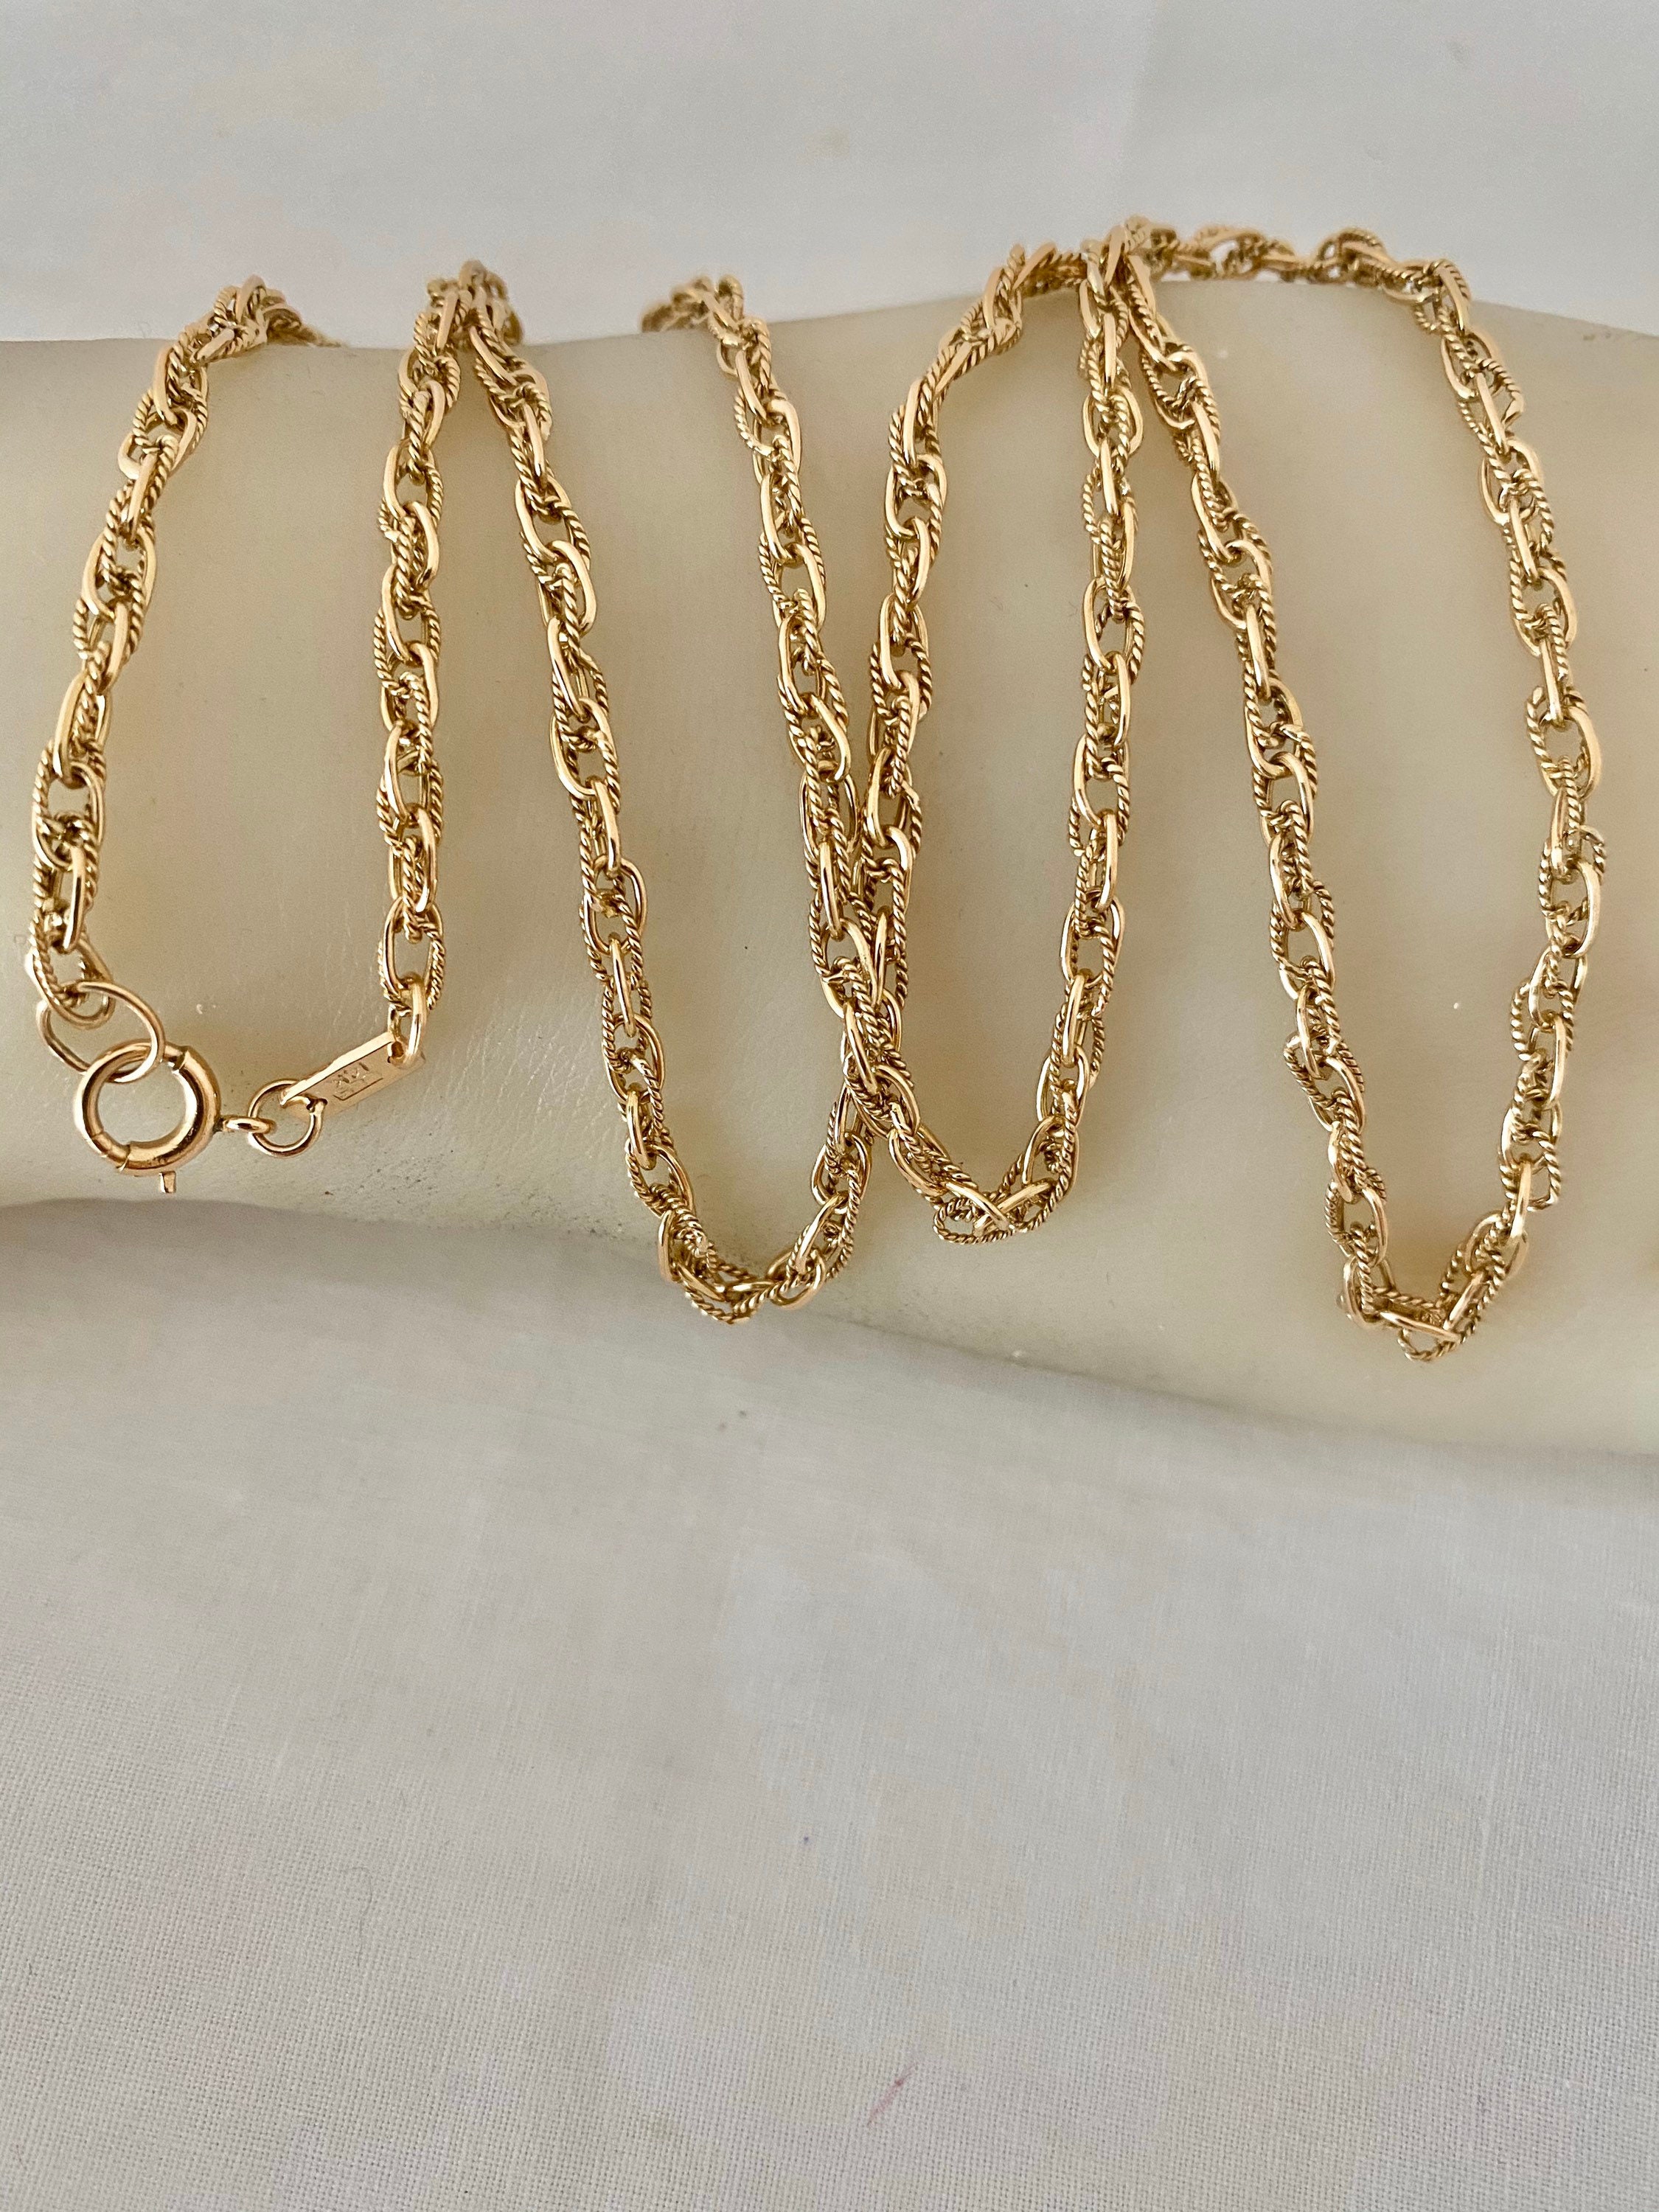 14K Solid Gold 24 Length Double Strand Chain Link | Etsy